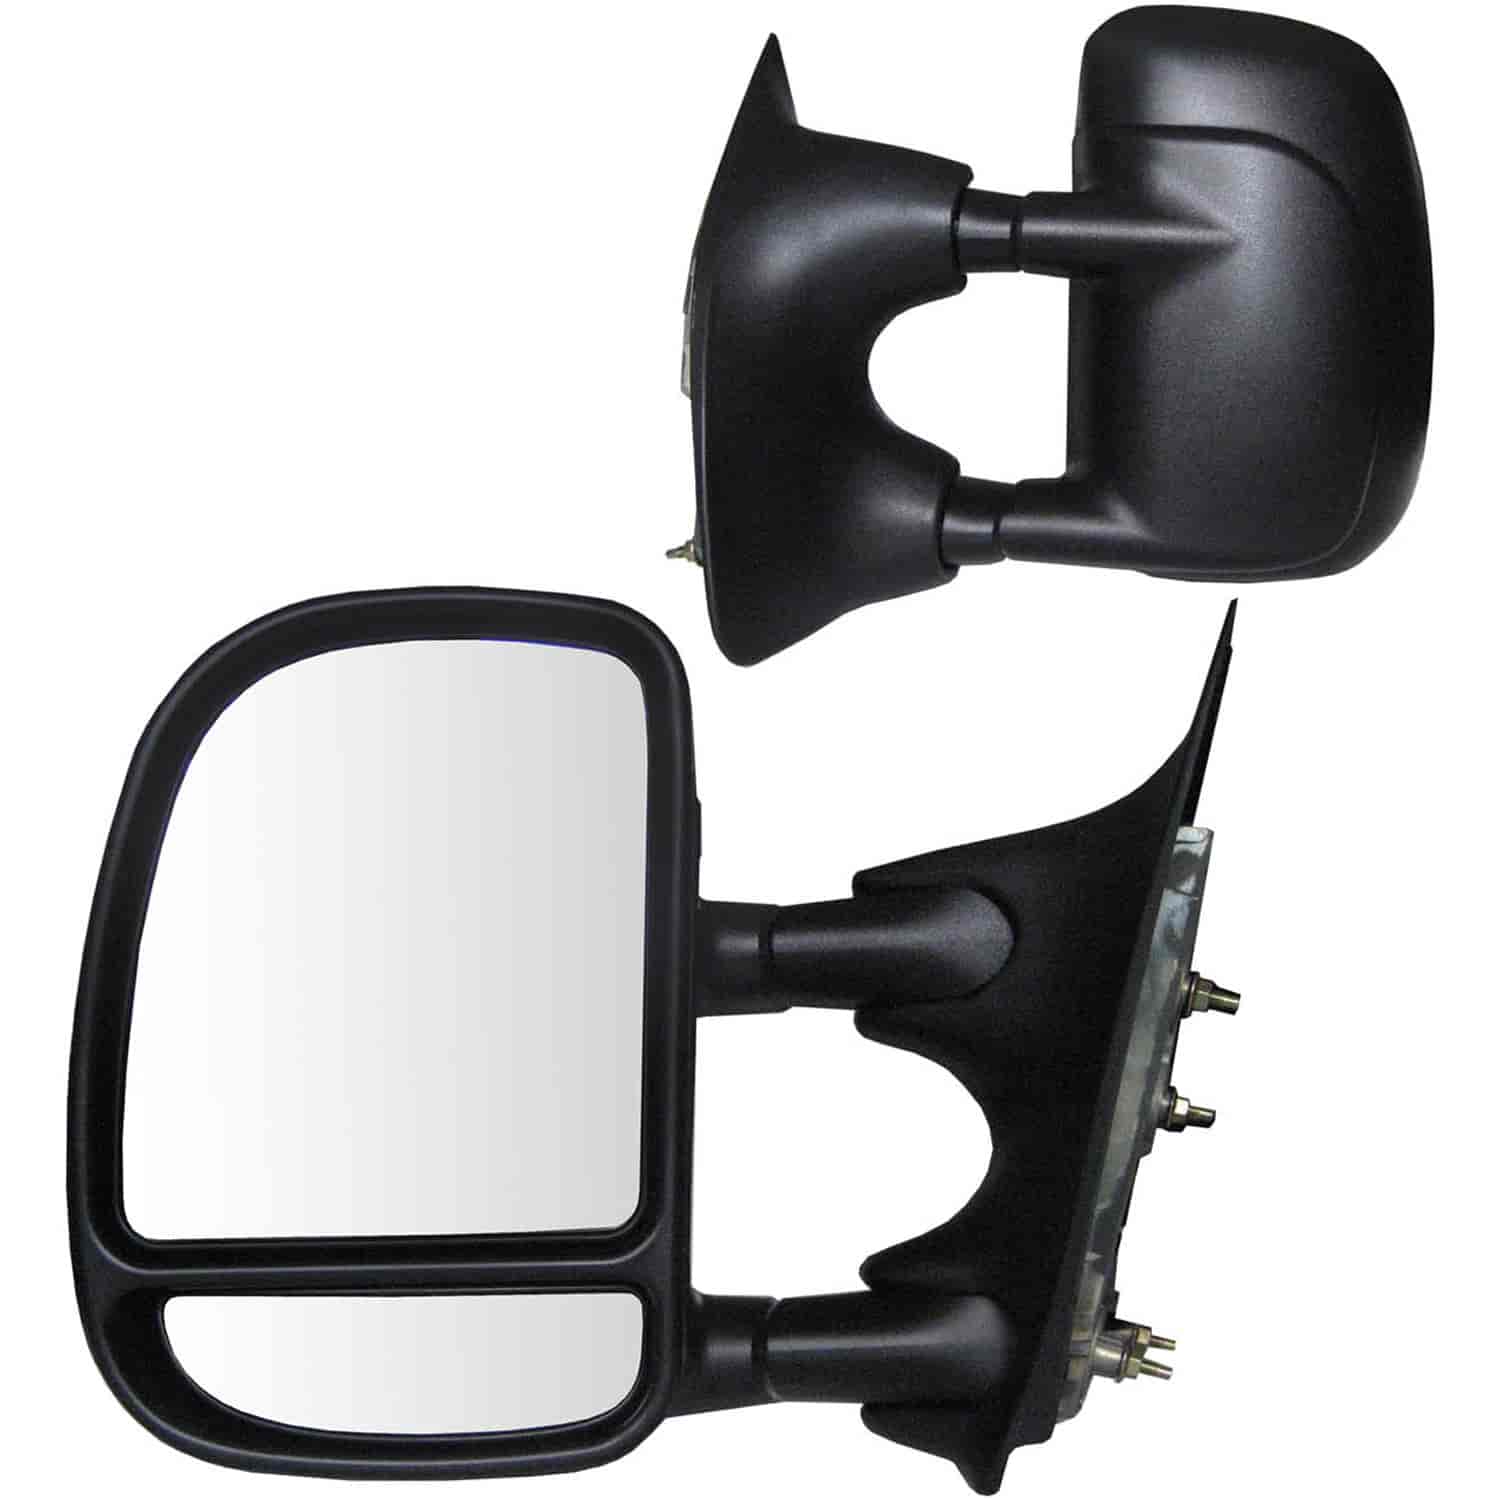 OEM Style Replacement mirror set for 00-05 Ford